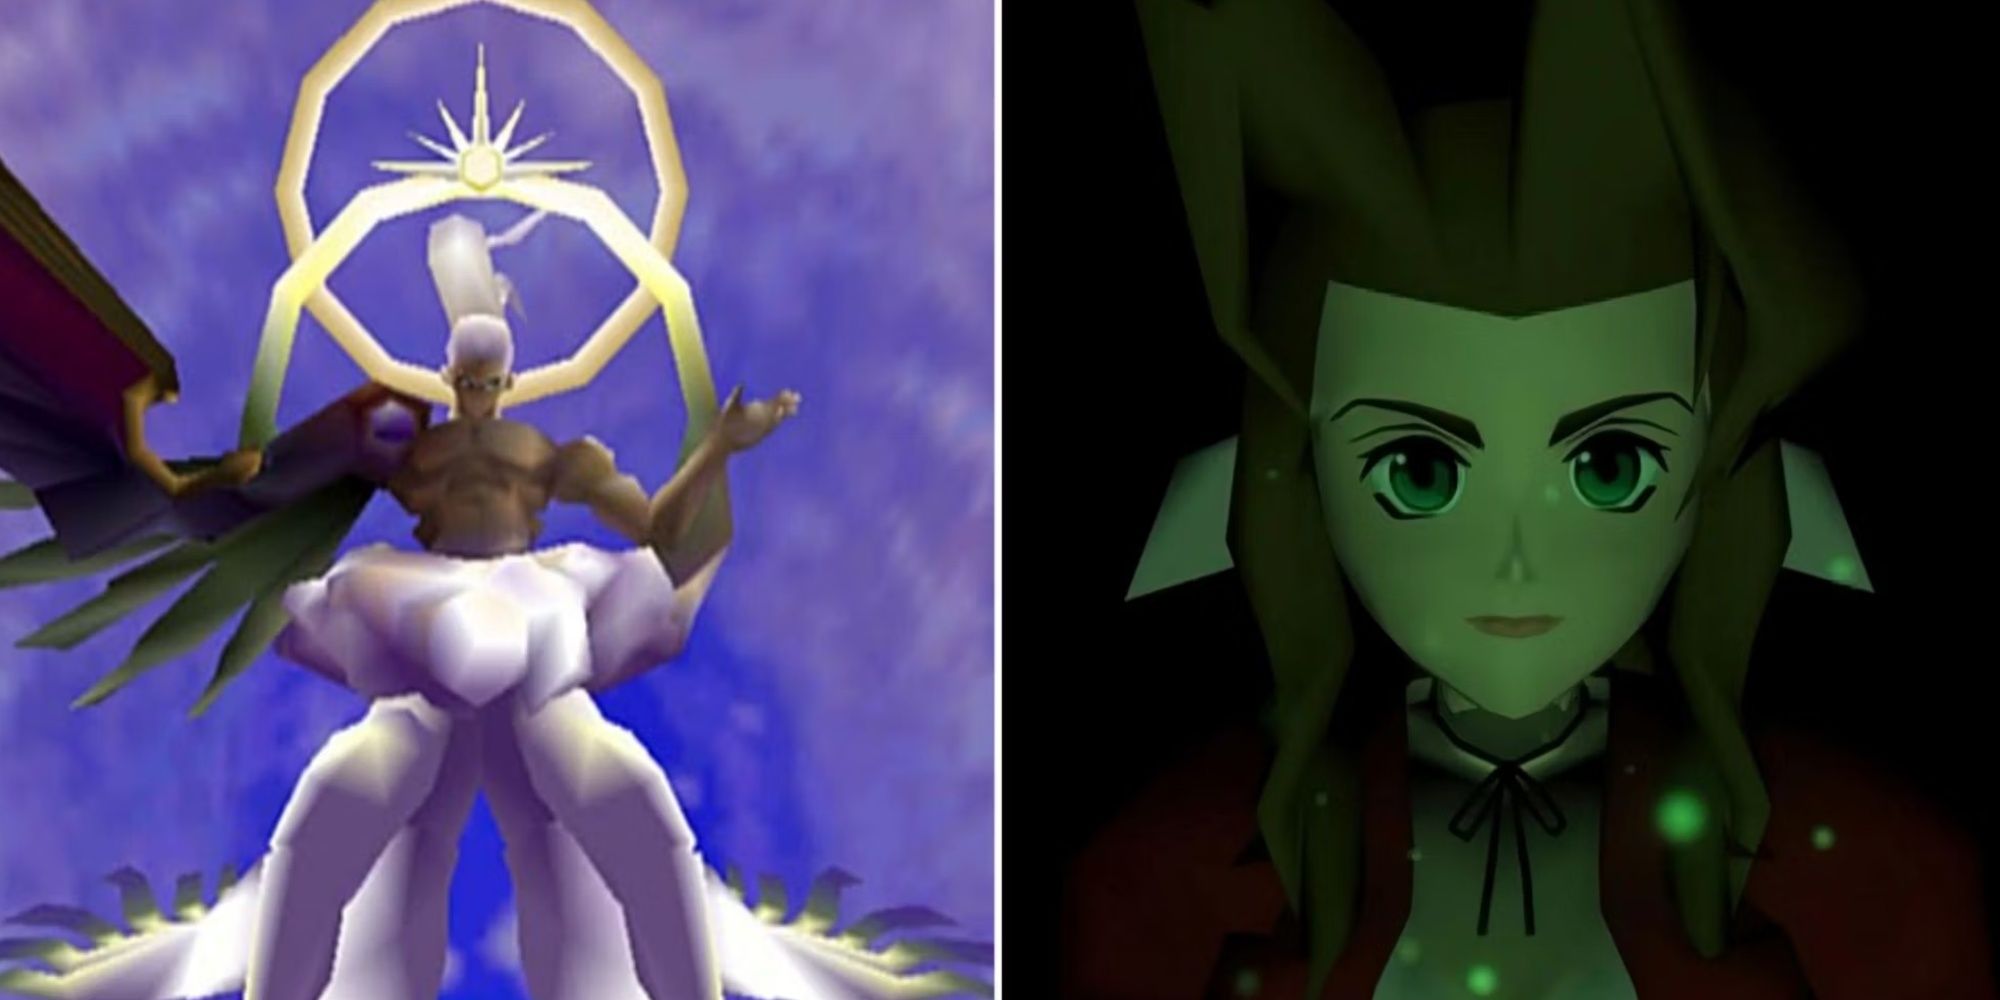 Split image screenshots of the Safer Sephiroth boss fight and Aerith Gainsborough in Final Fantasy 7